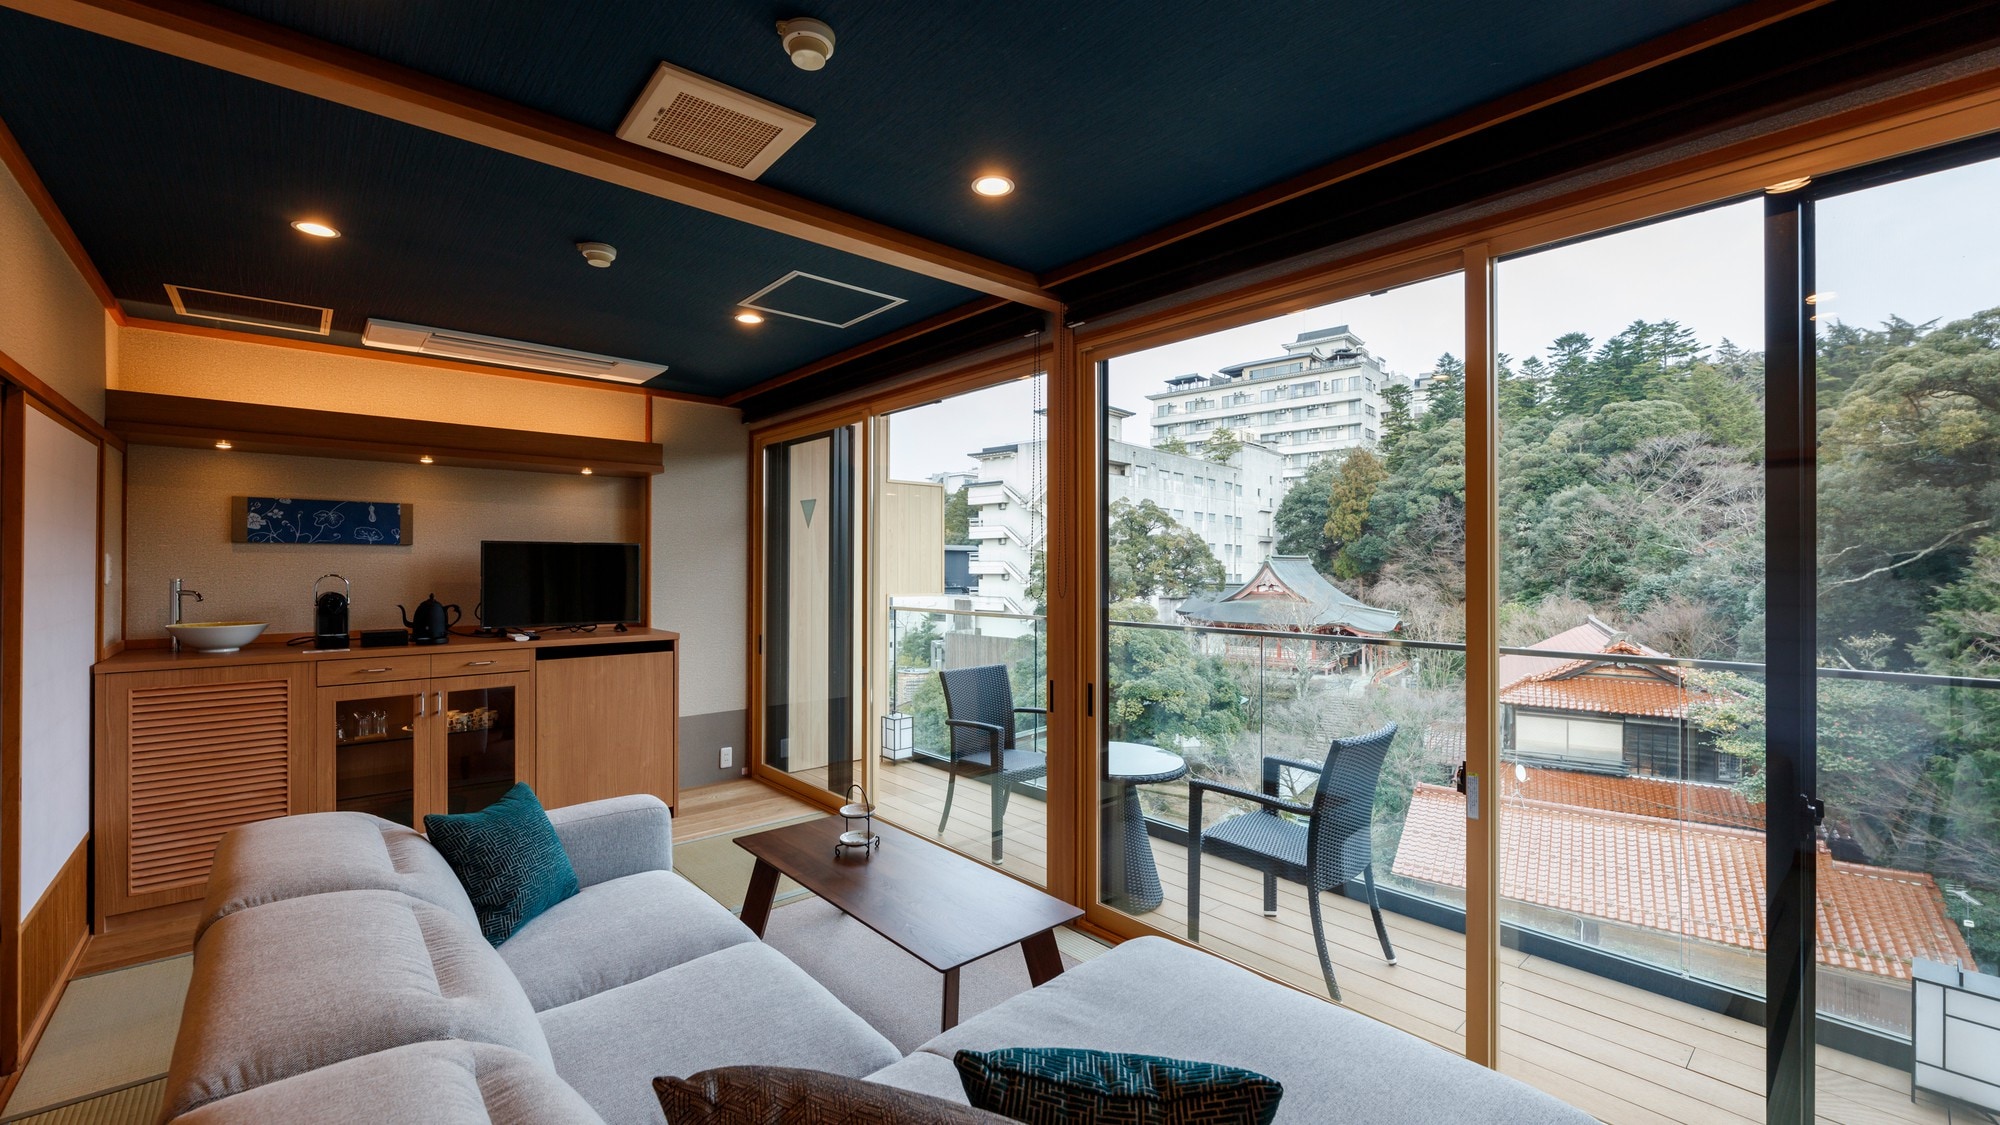 Japanese jr suite with cypress open-air bath